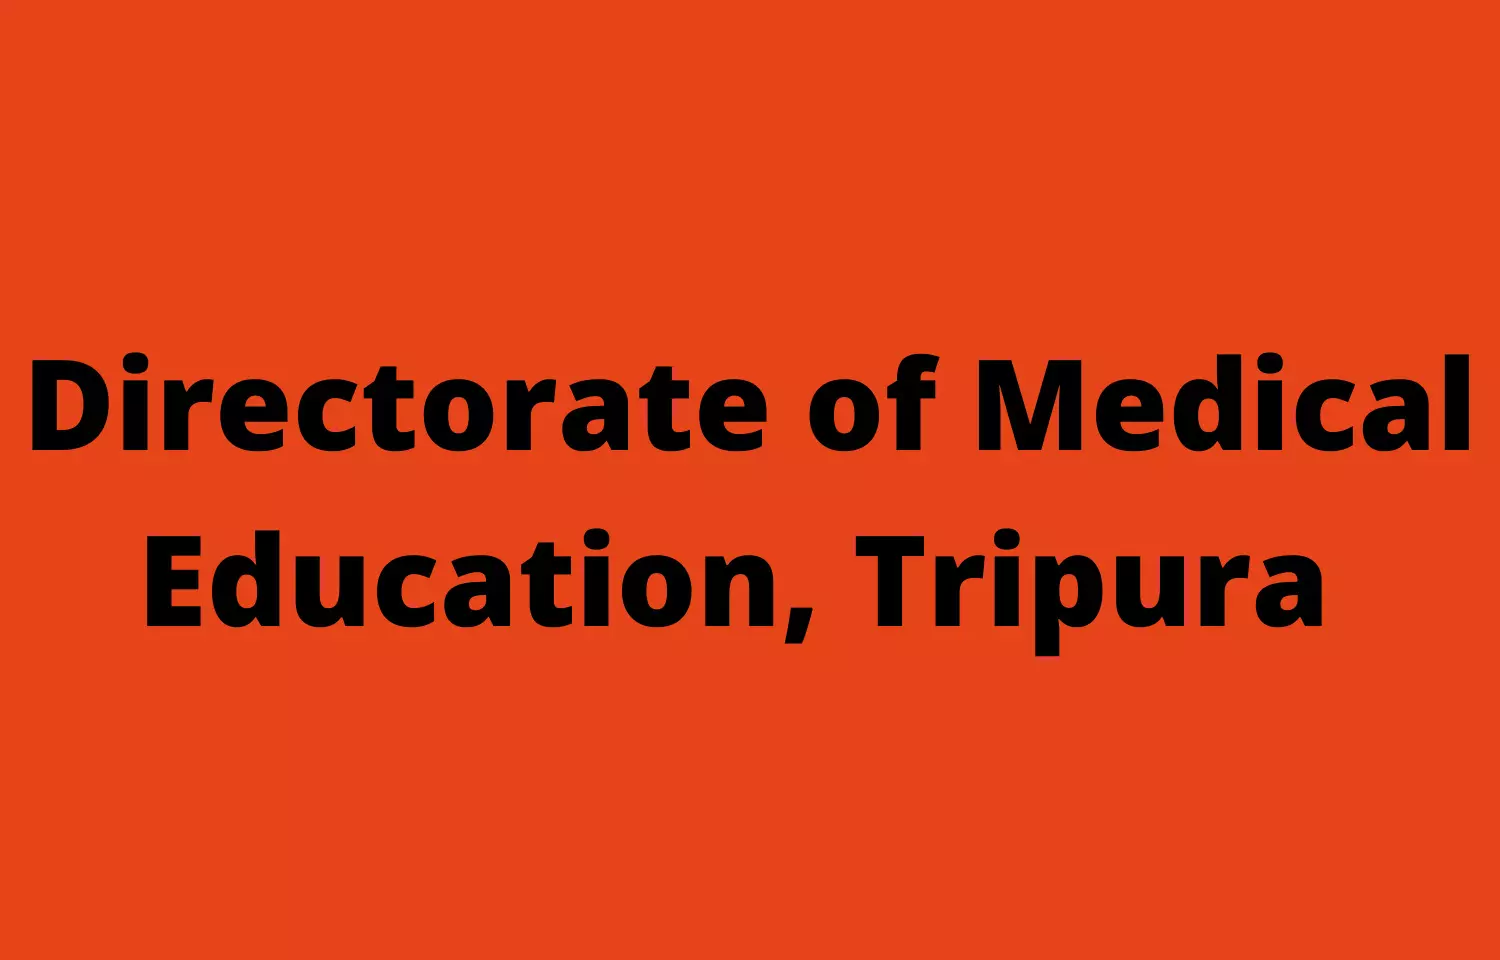 DME Tripura invites applications from aspirants for Central Pool MBBS, BDS seats allocated for spouses, children of terrorist victims